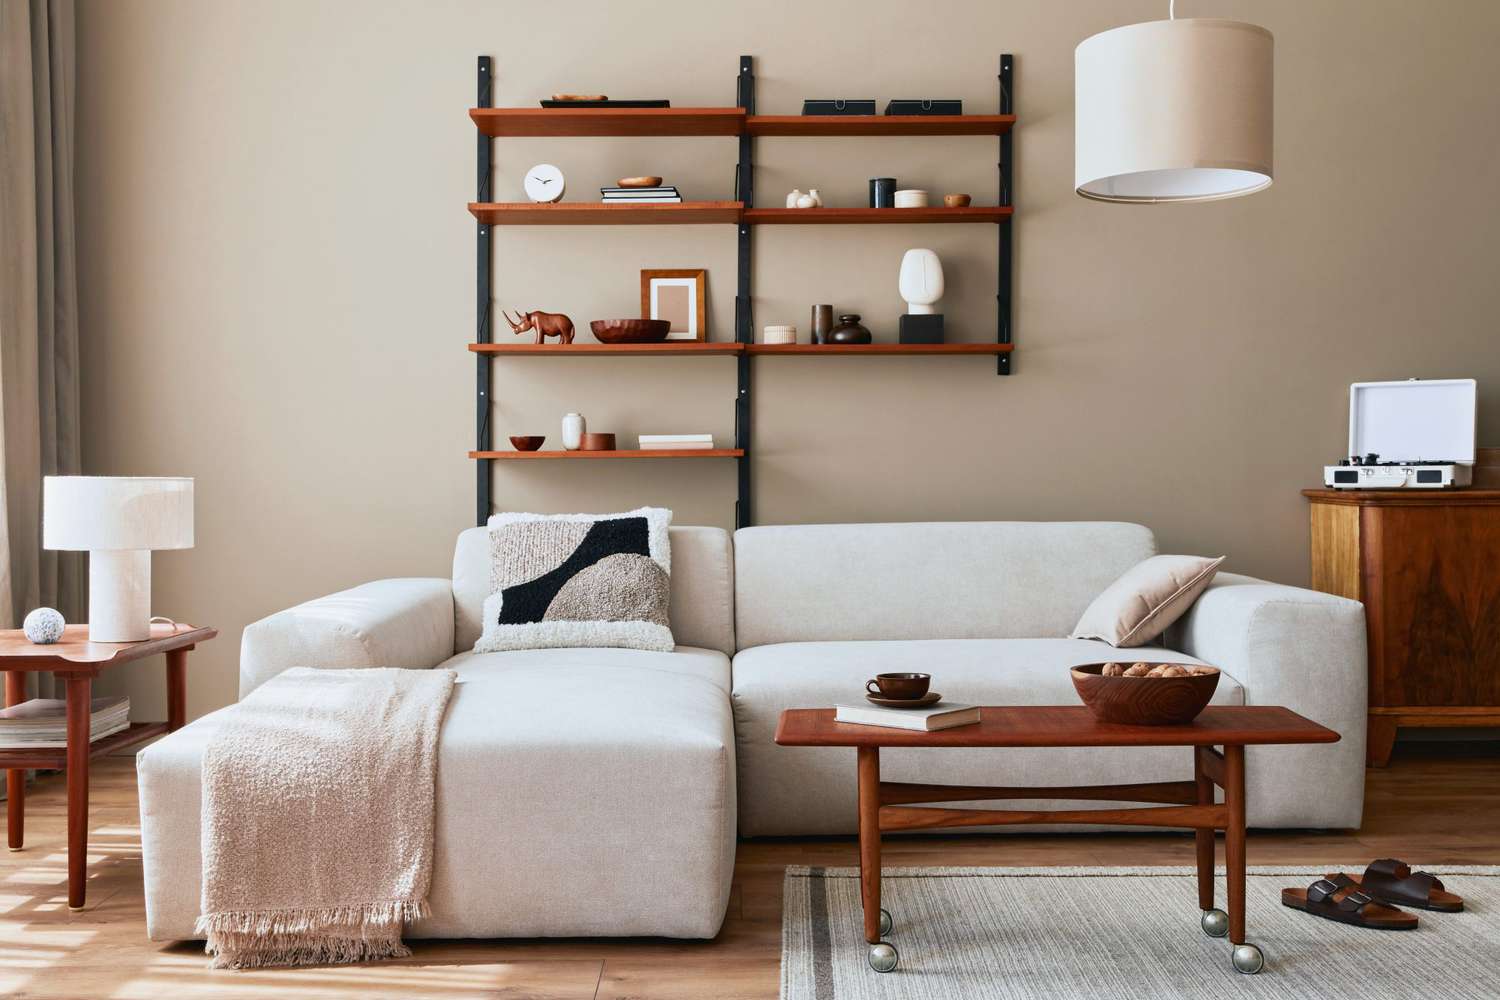 5 Home Decor Trends That I Hope Will Endure In 2023